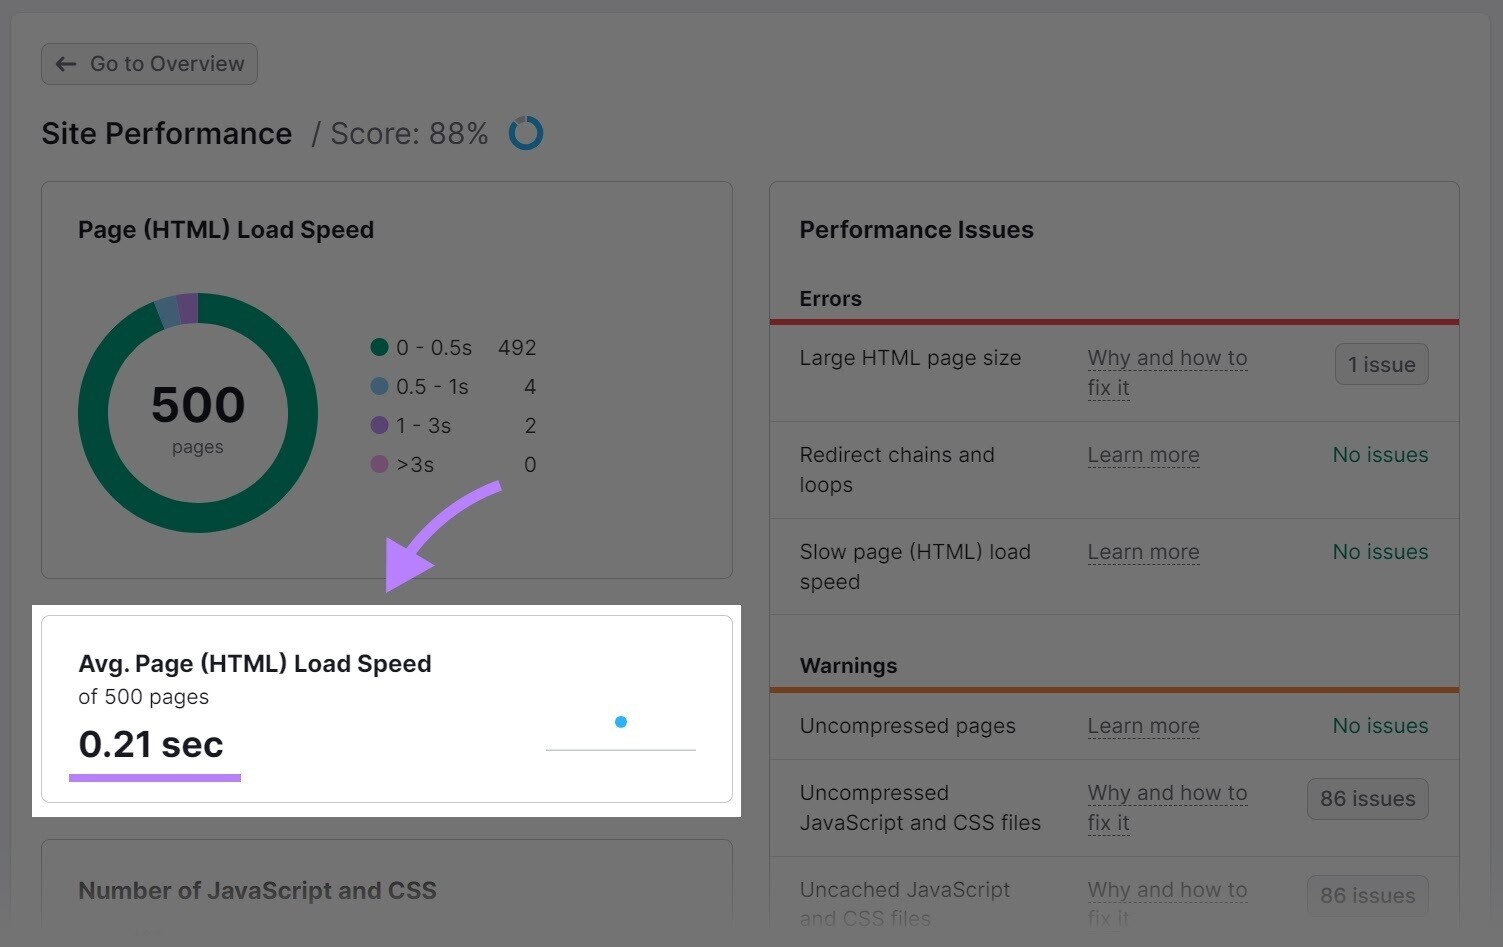 average page load speed showing 0.21 sec in "Site Performance" report